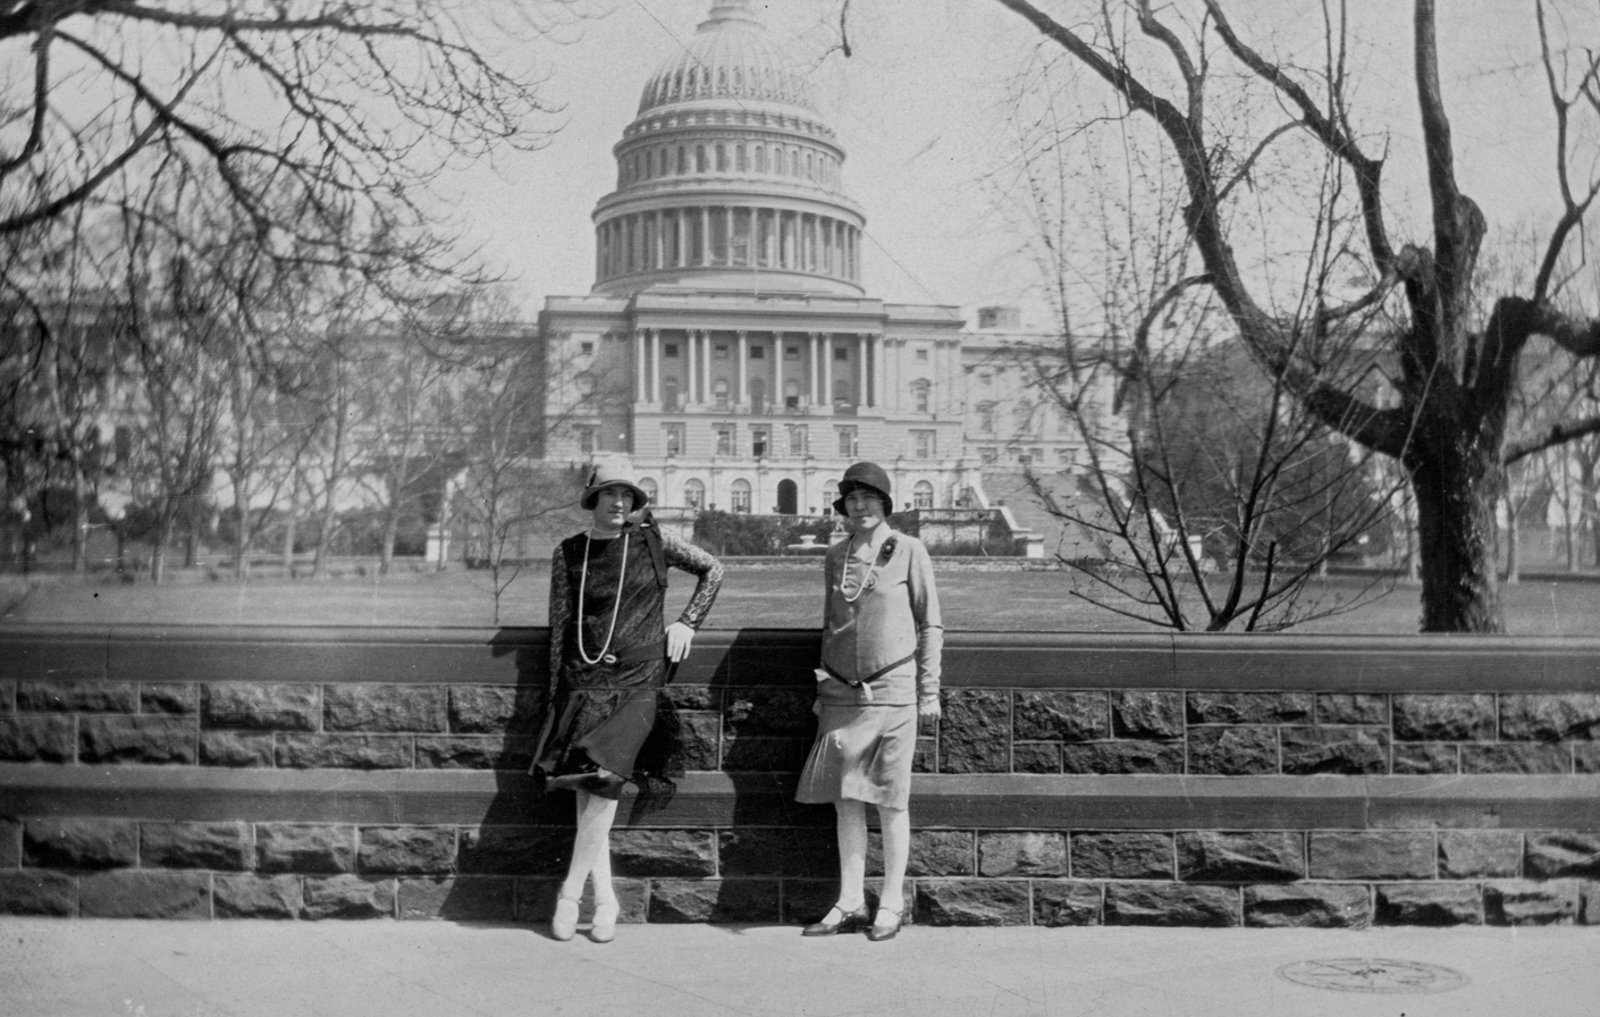 Henrietta and Janie Higgins in front of Capitol Hill, Washington, U.S. in the 1920s.